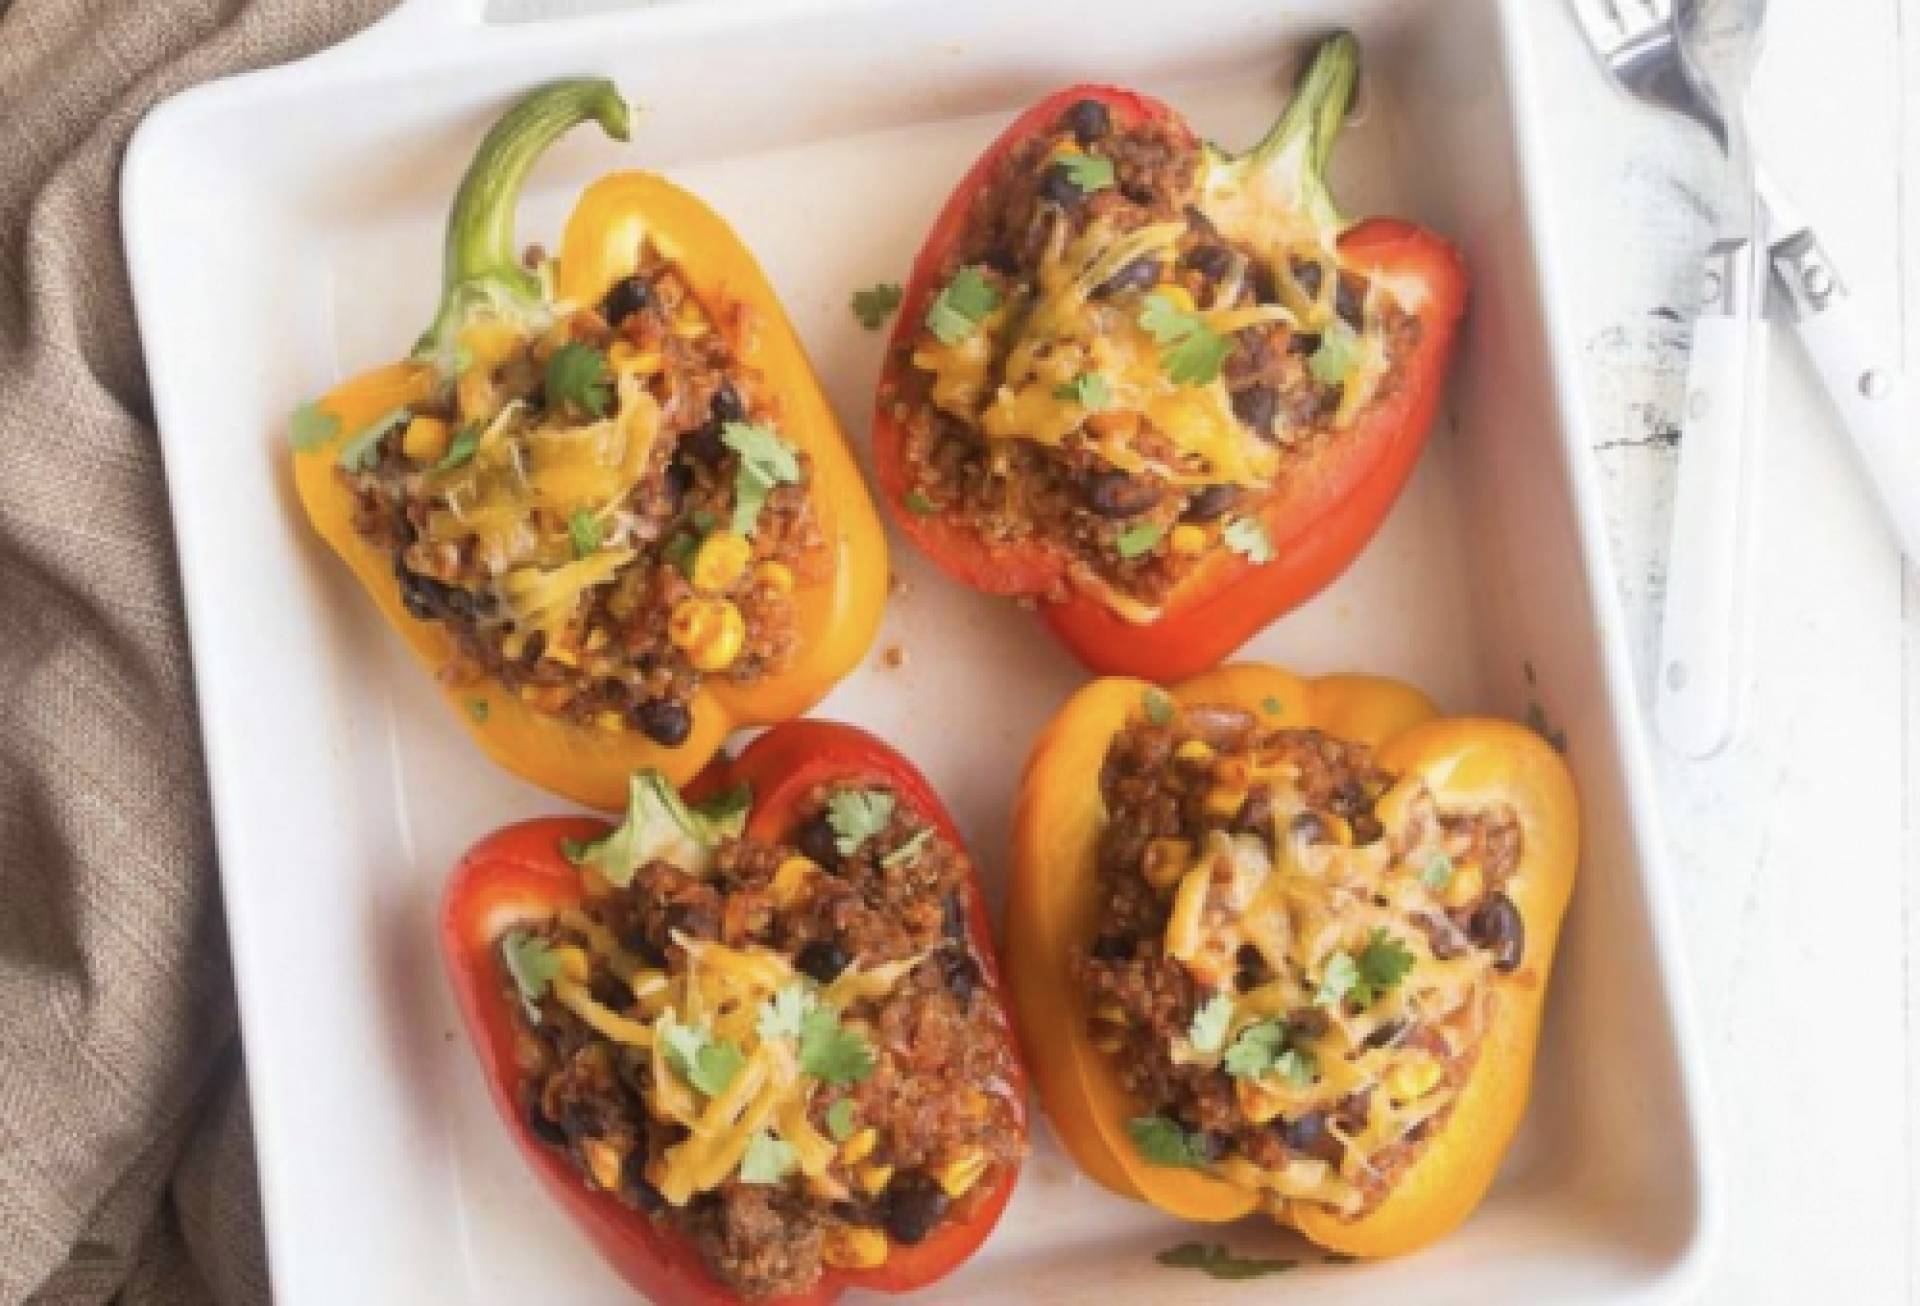 KETO Turkey Stuffed Bell Peppers with Chipotle Ranch